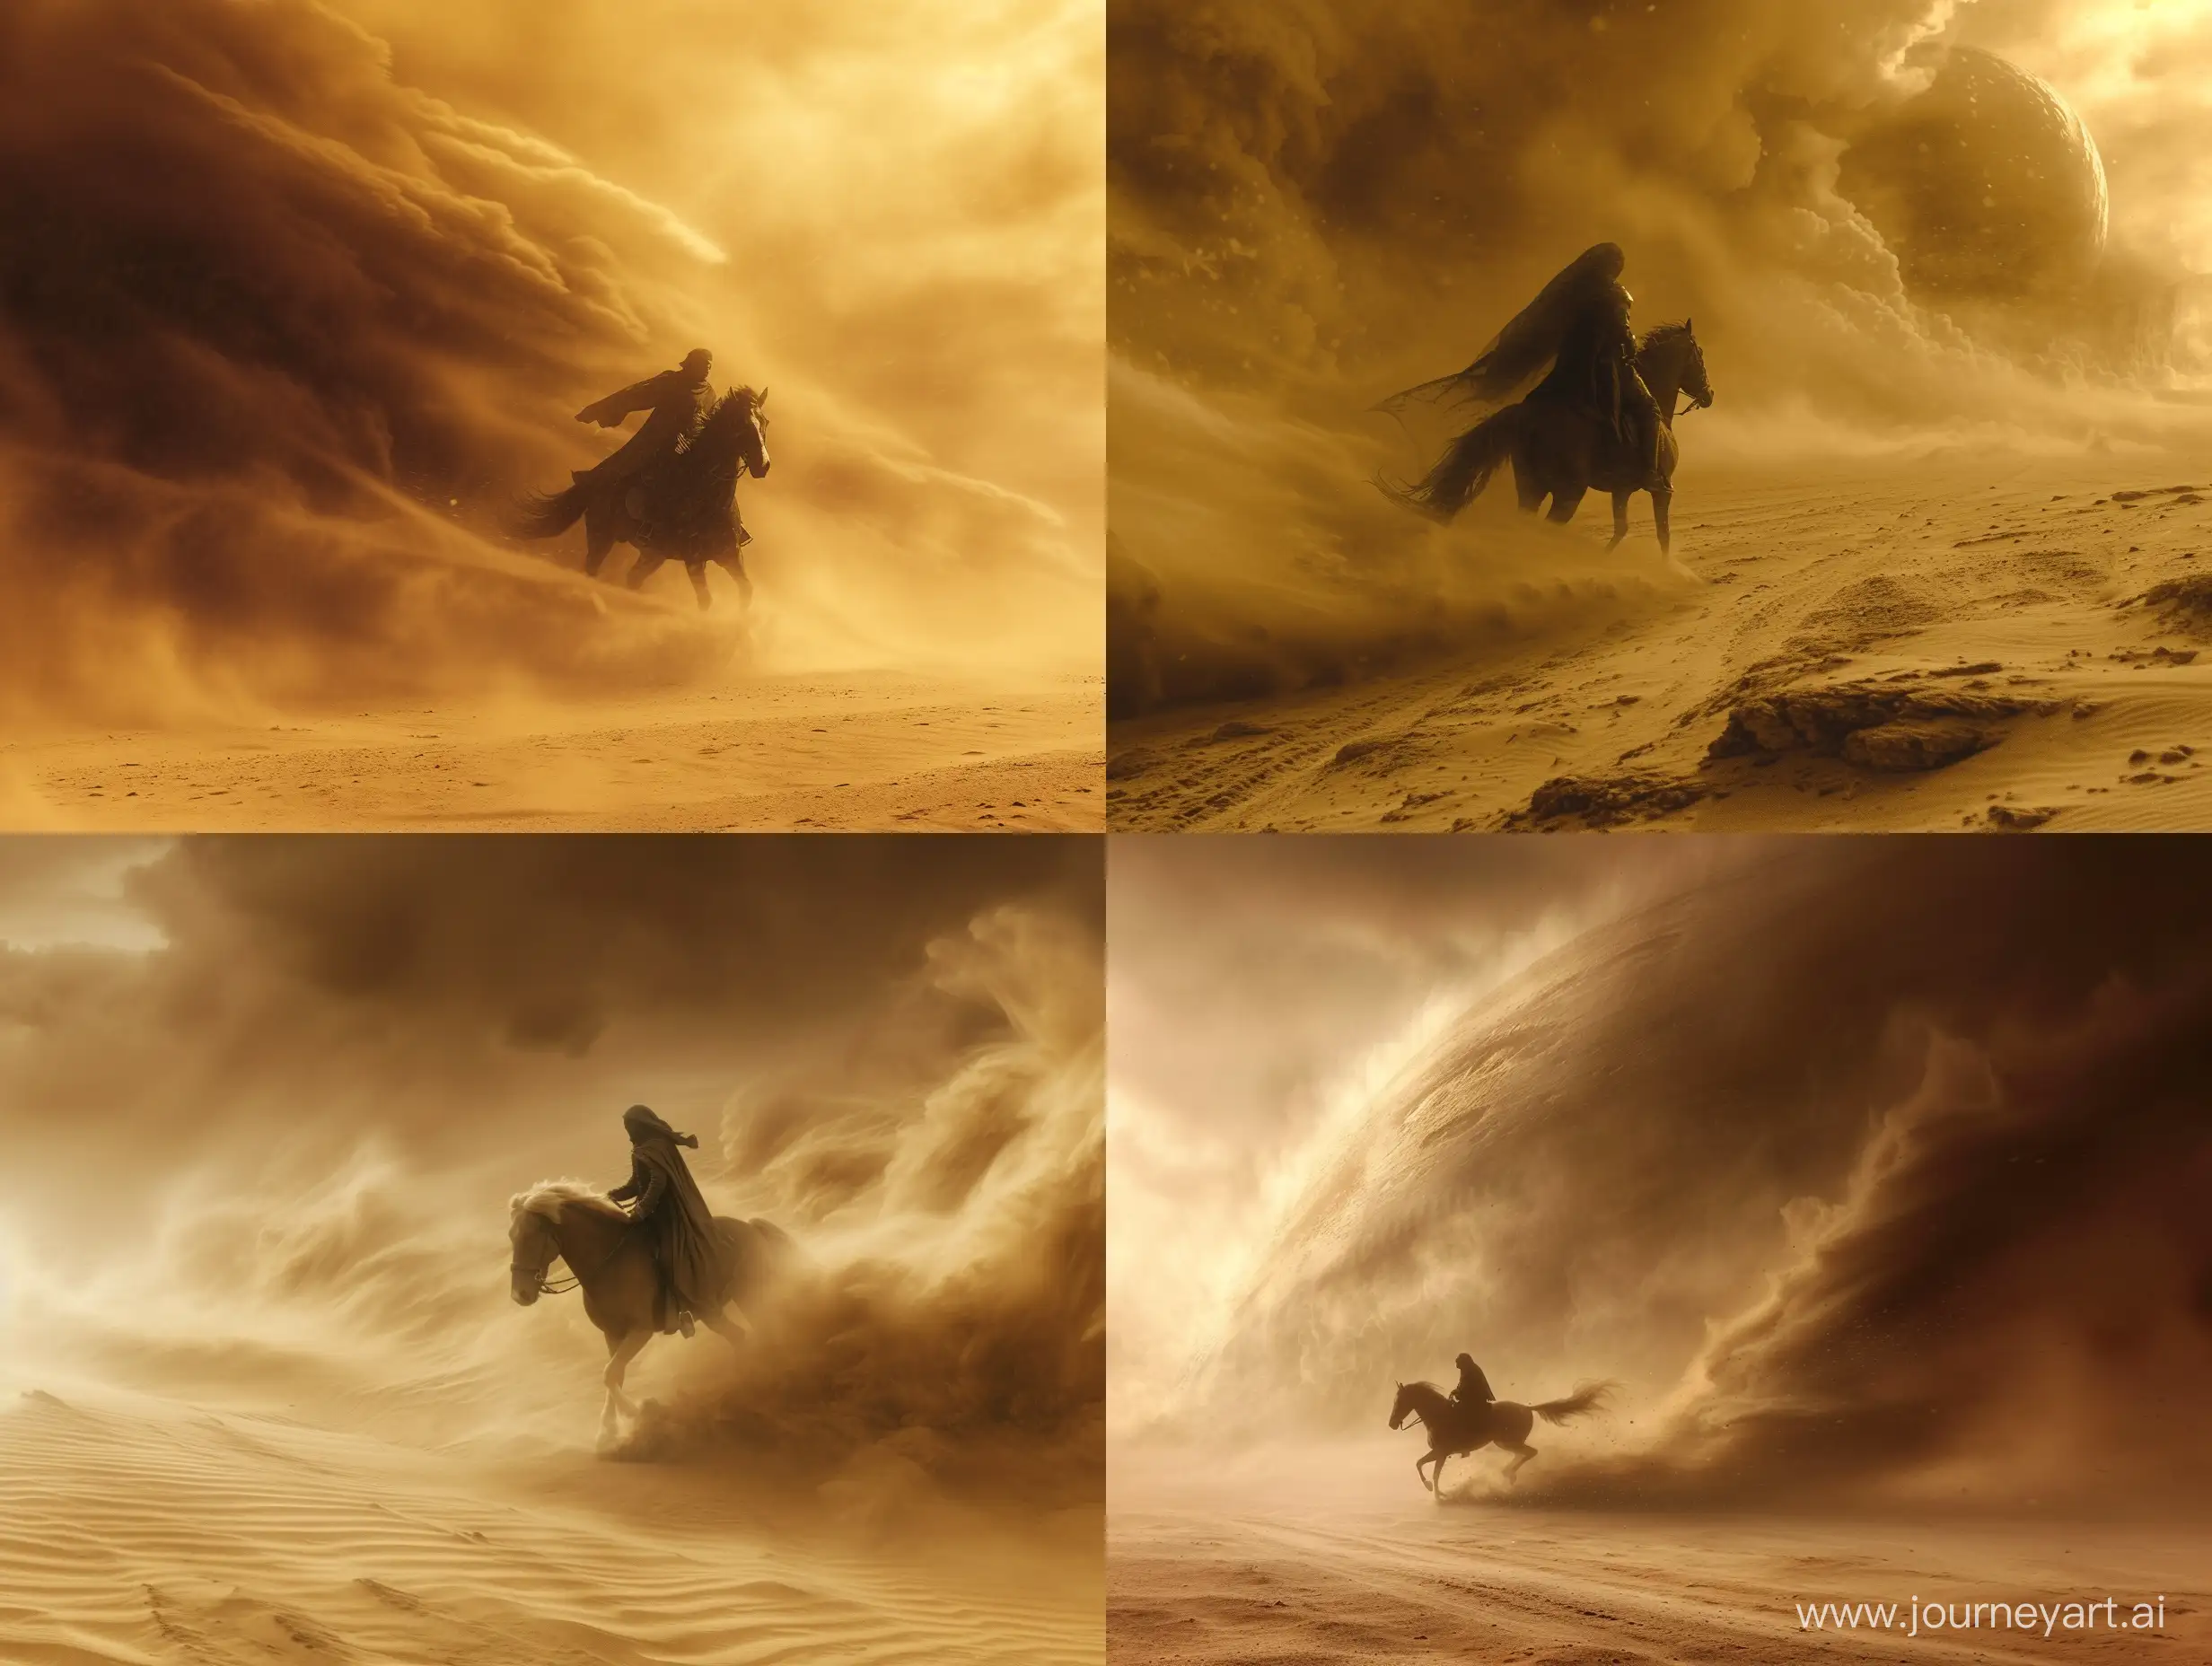 Mysterious-Disappearance-Cinematic-Masterpiece-of-Man-and-Arabian-Horse-in-Desert-Sandstorm